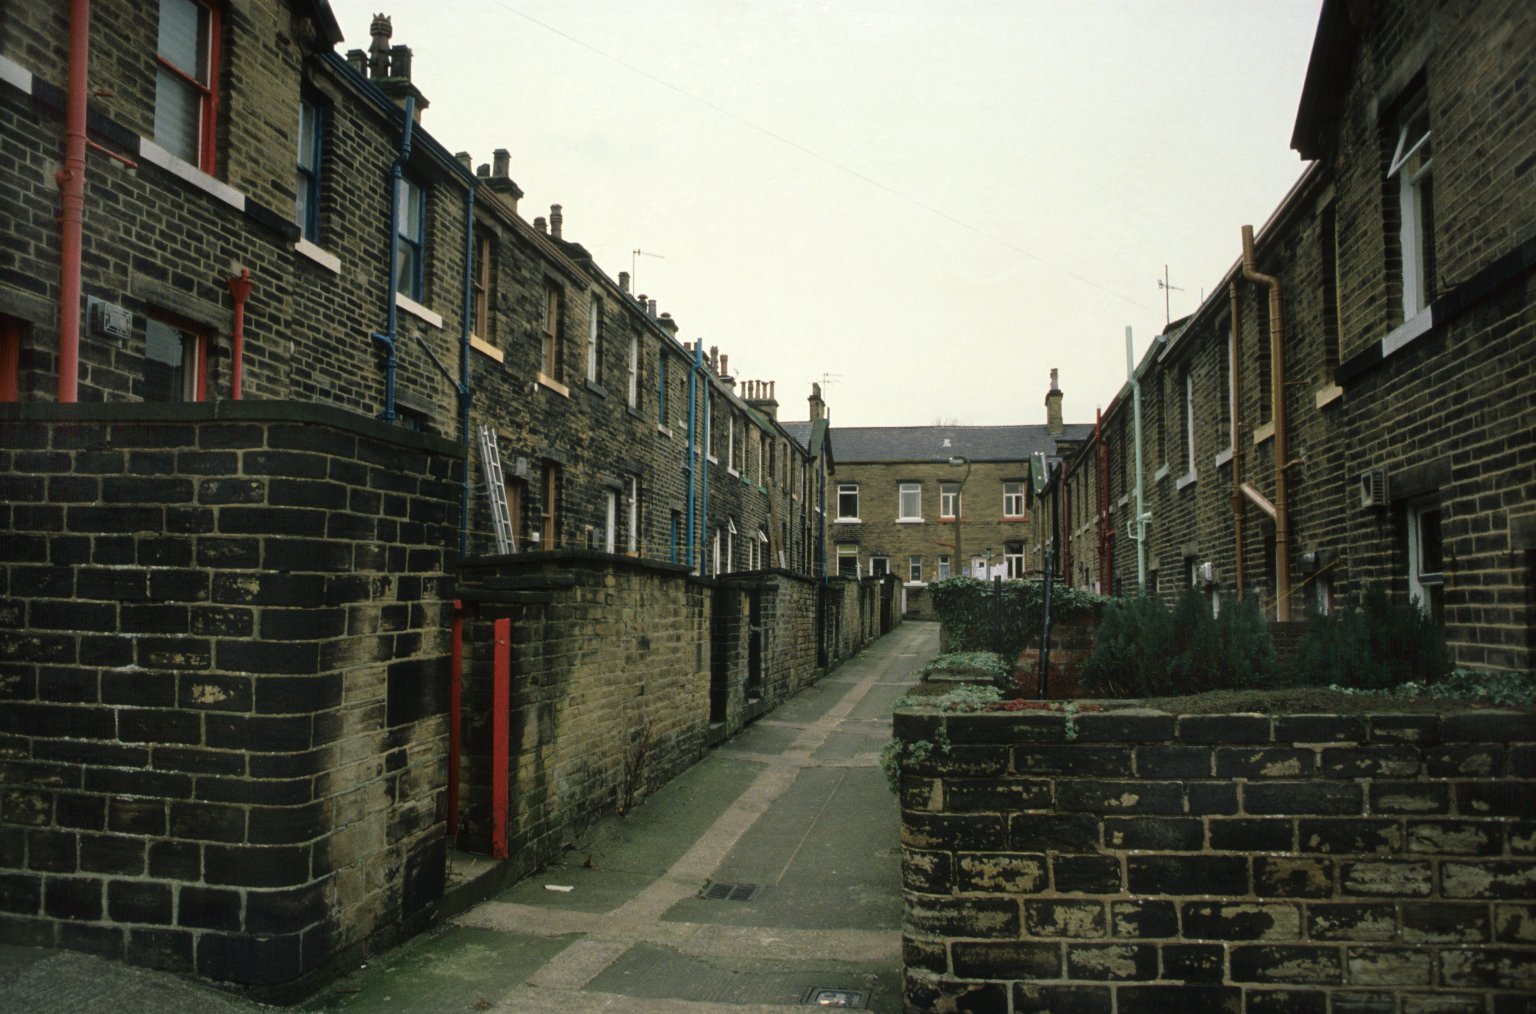 Workers' Housing